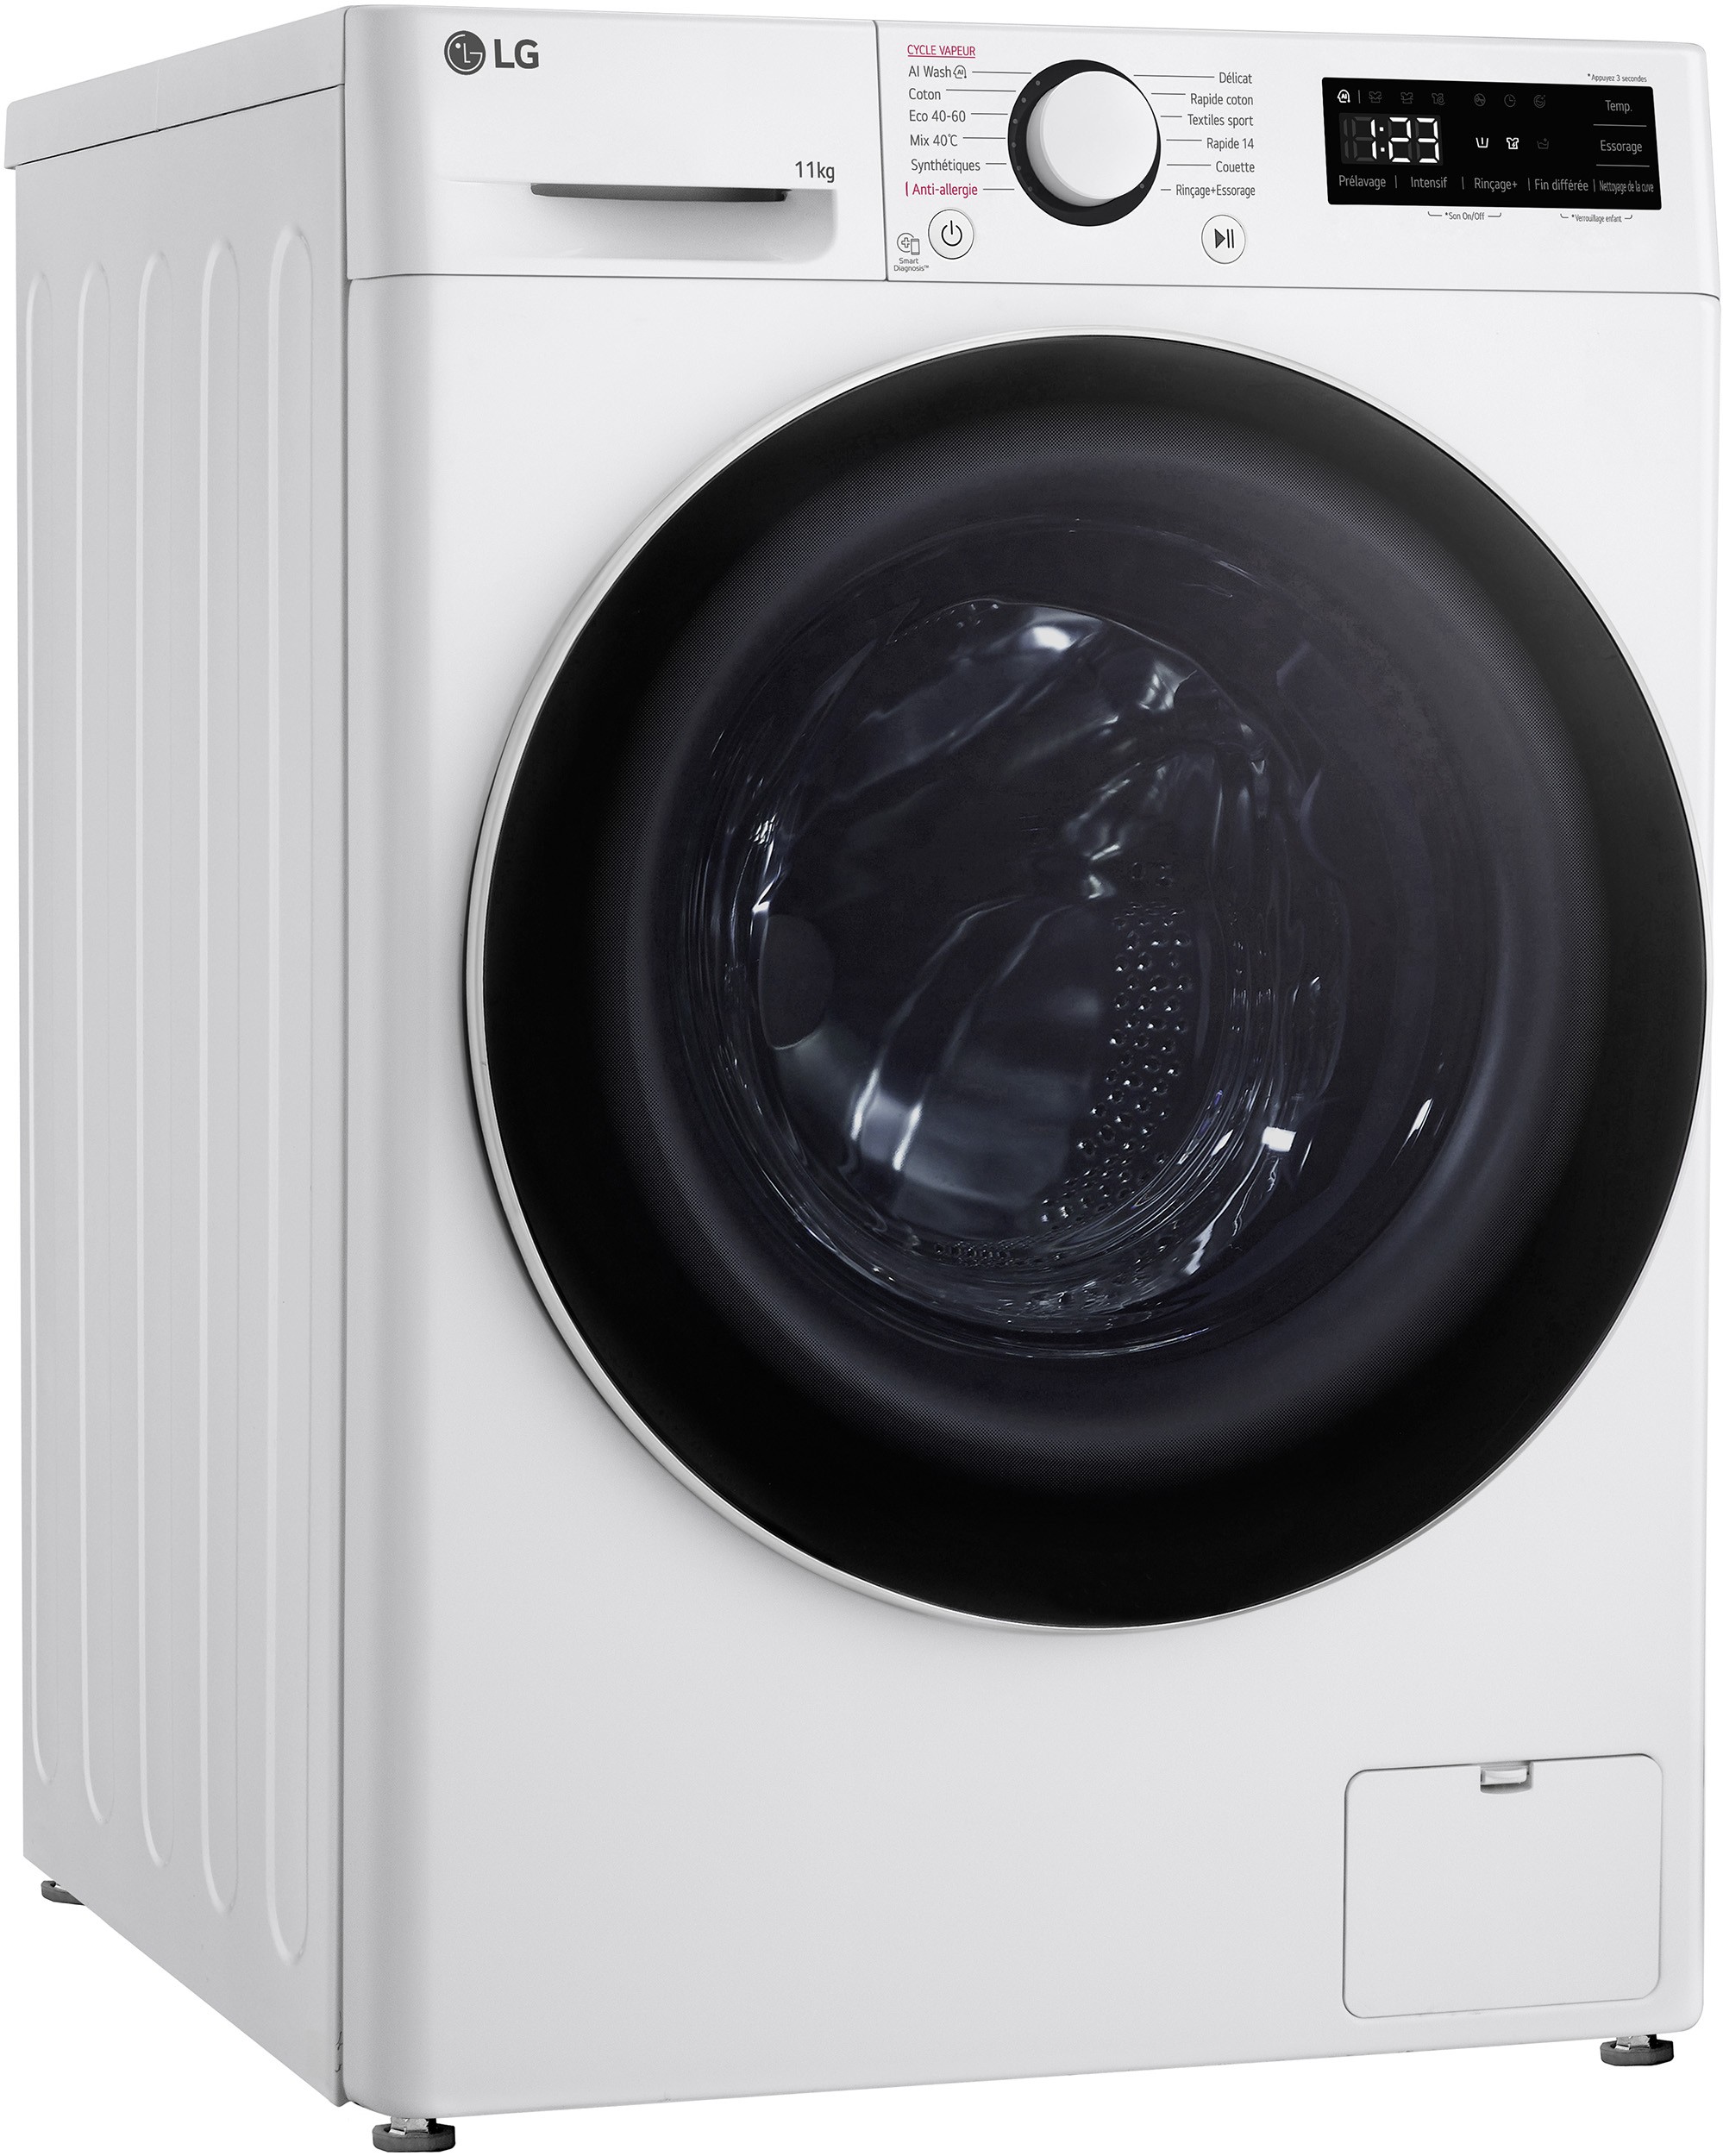 LG Lave linge Frontal AI DirectDrive Steam 1400rs/mn 11kg - F14R50WHS